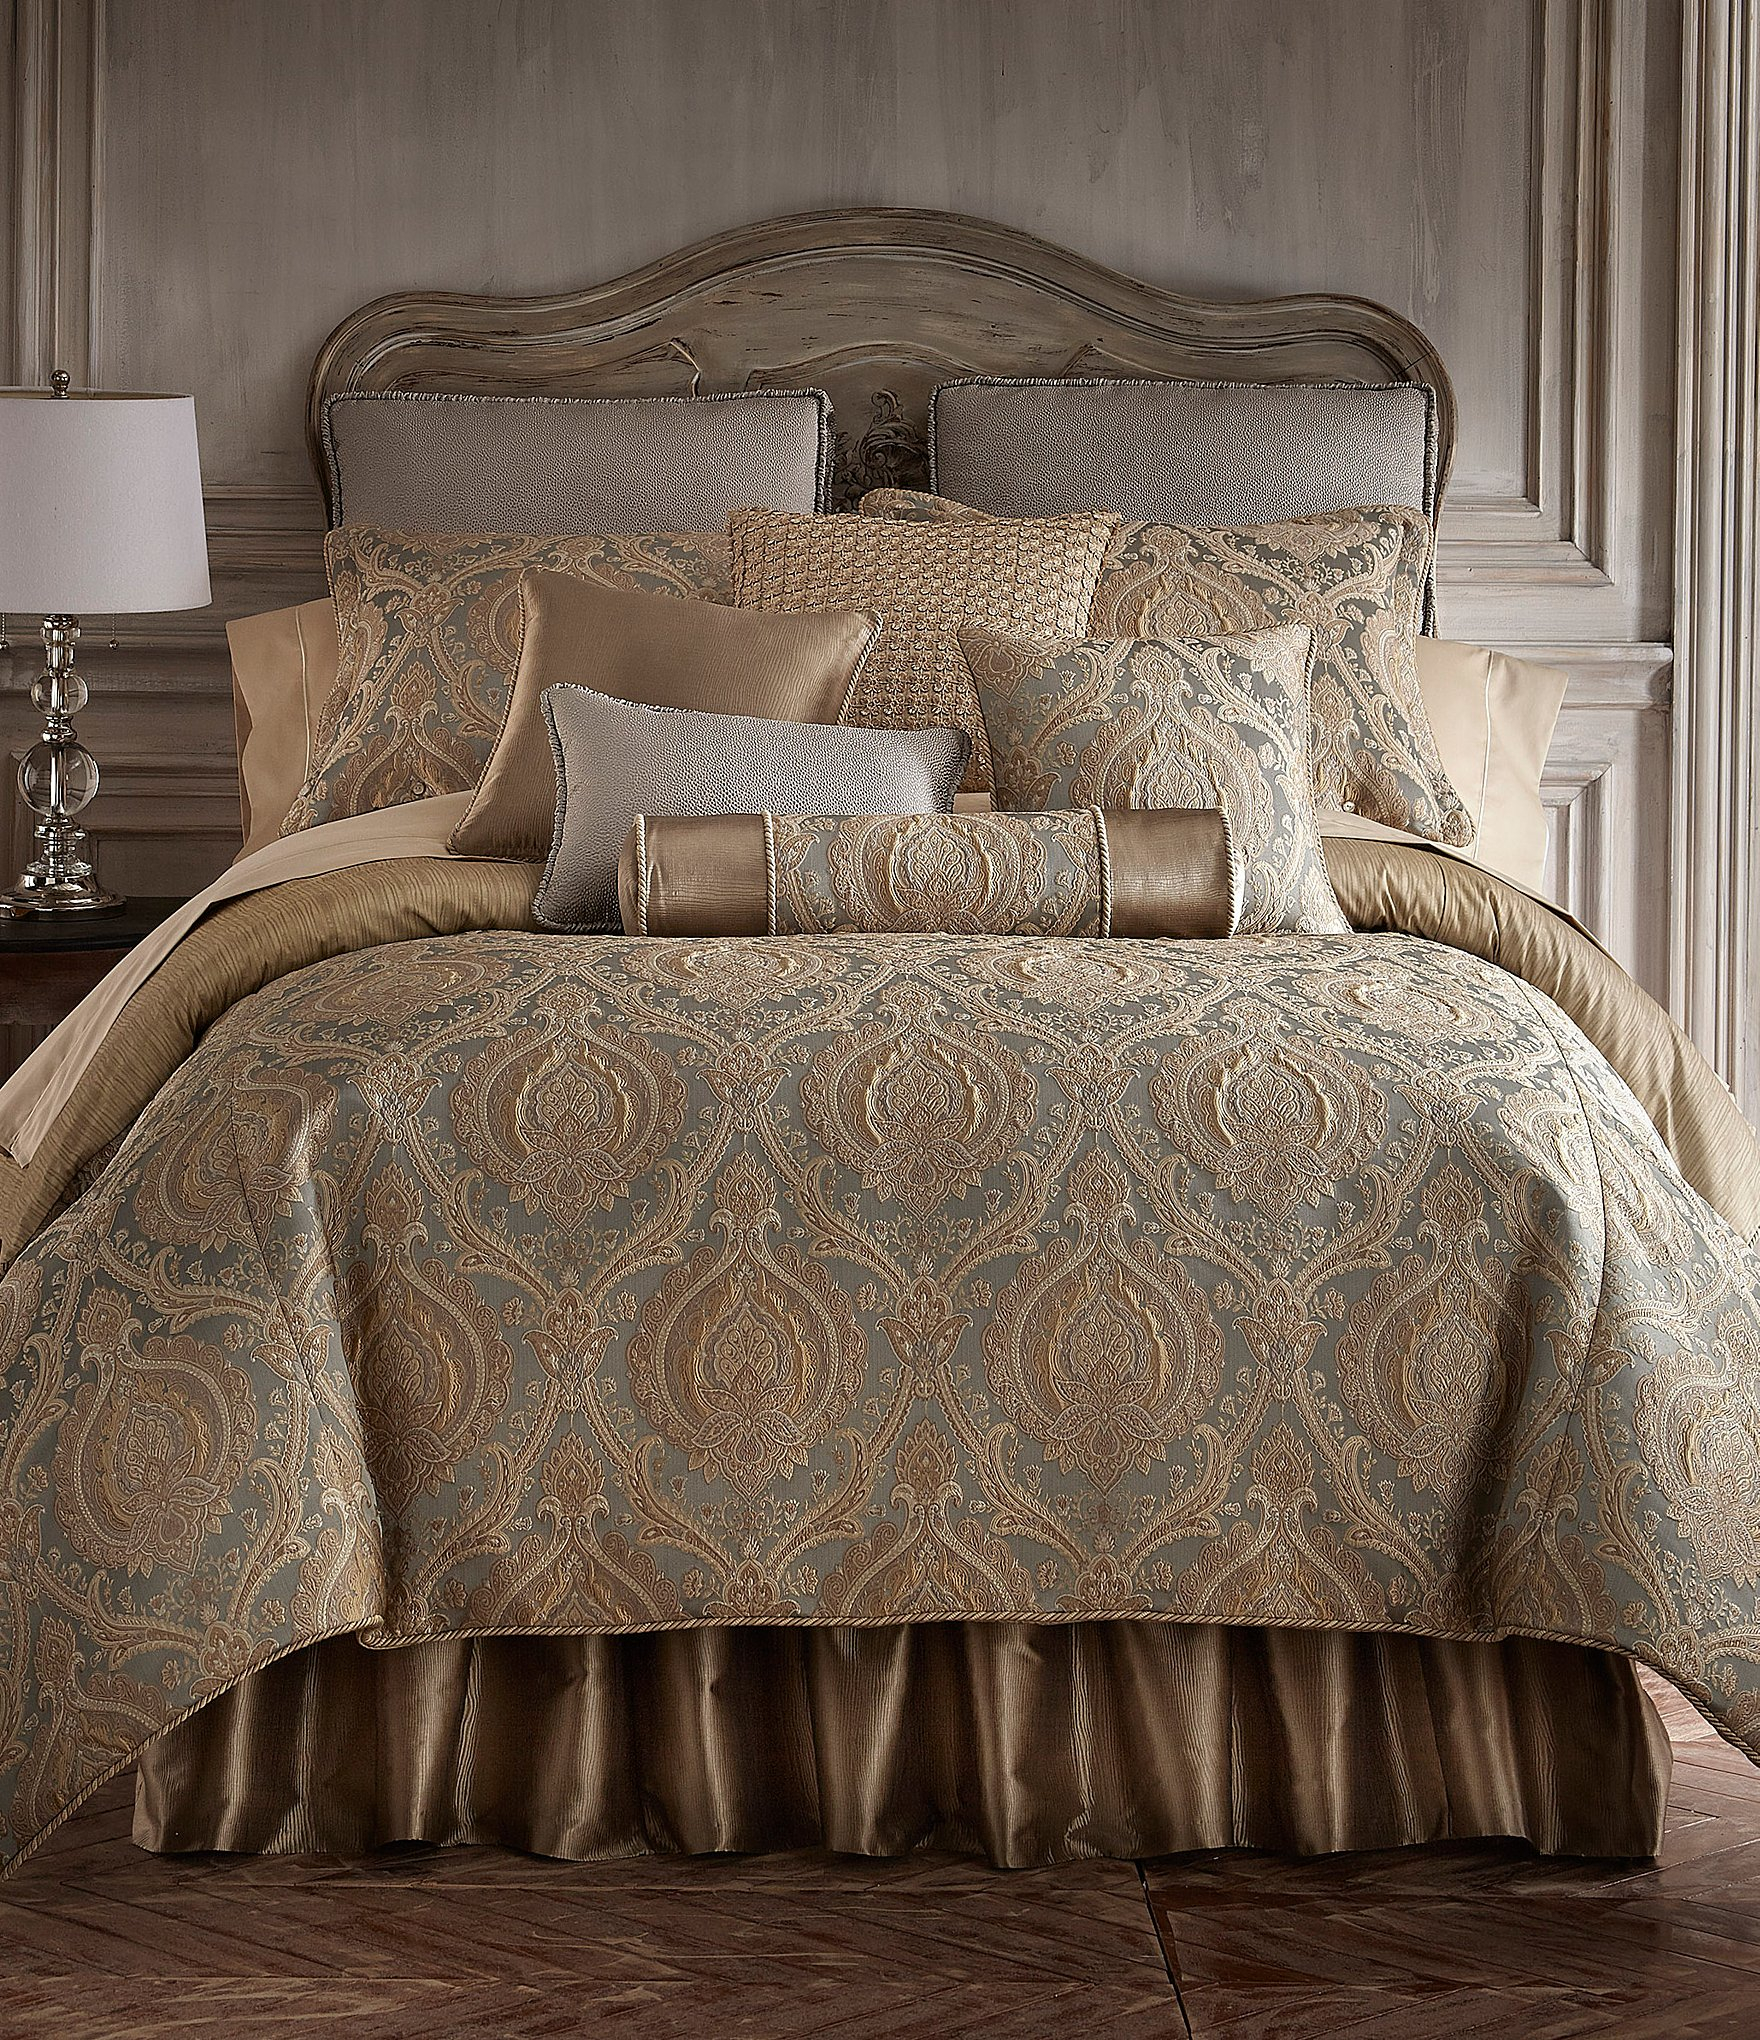 Rose Tree Norwich Damask Striped Comforter Set Dillards pertaining to dimensions 1760 X 2040